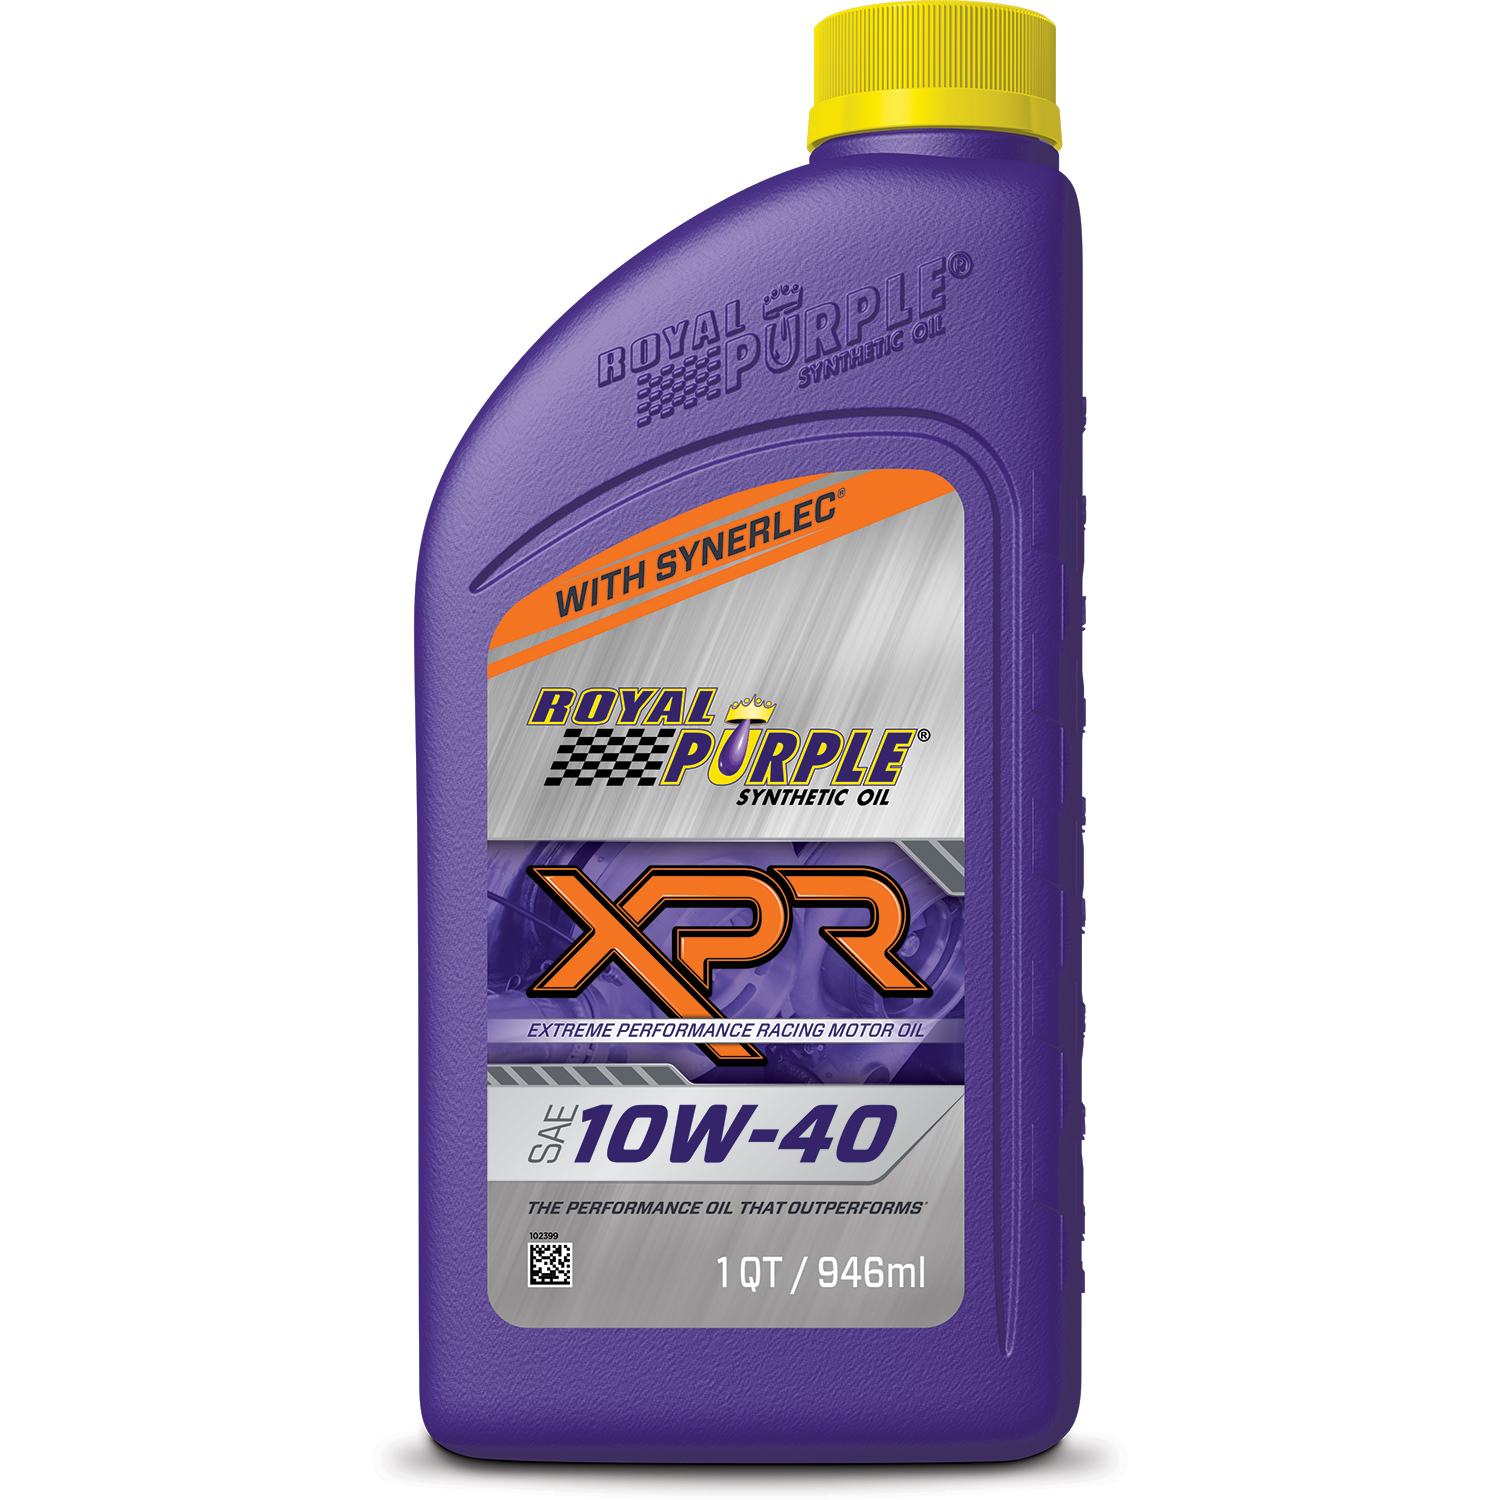 ROYAL PURPLE Motor Oil Extreme Performance Racing 10W40 Synthetic 1 qt Bottle Ea